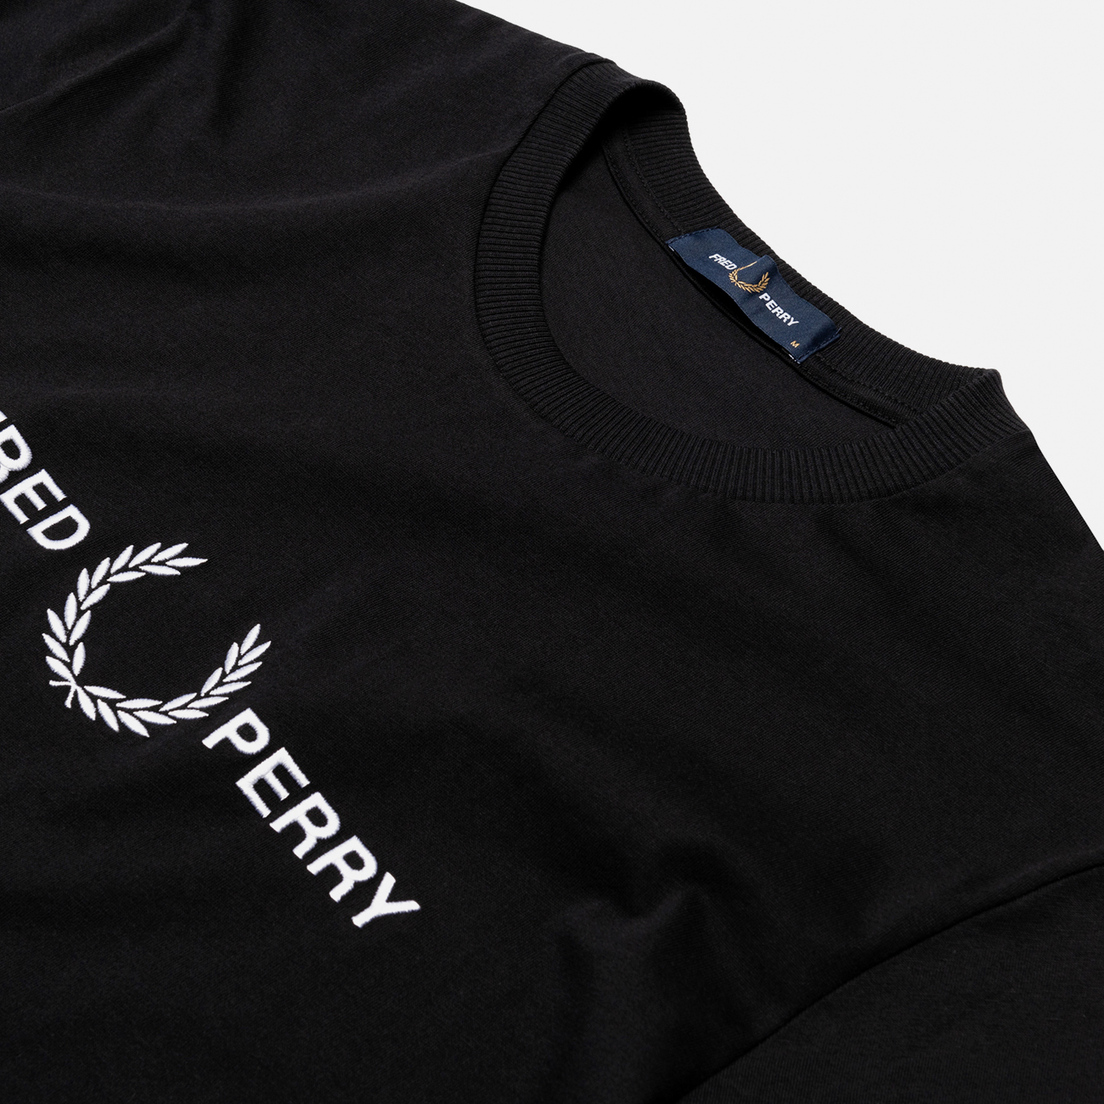 Fred Perry Мужская футболка Graphic